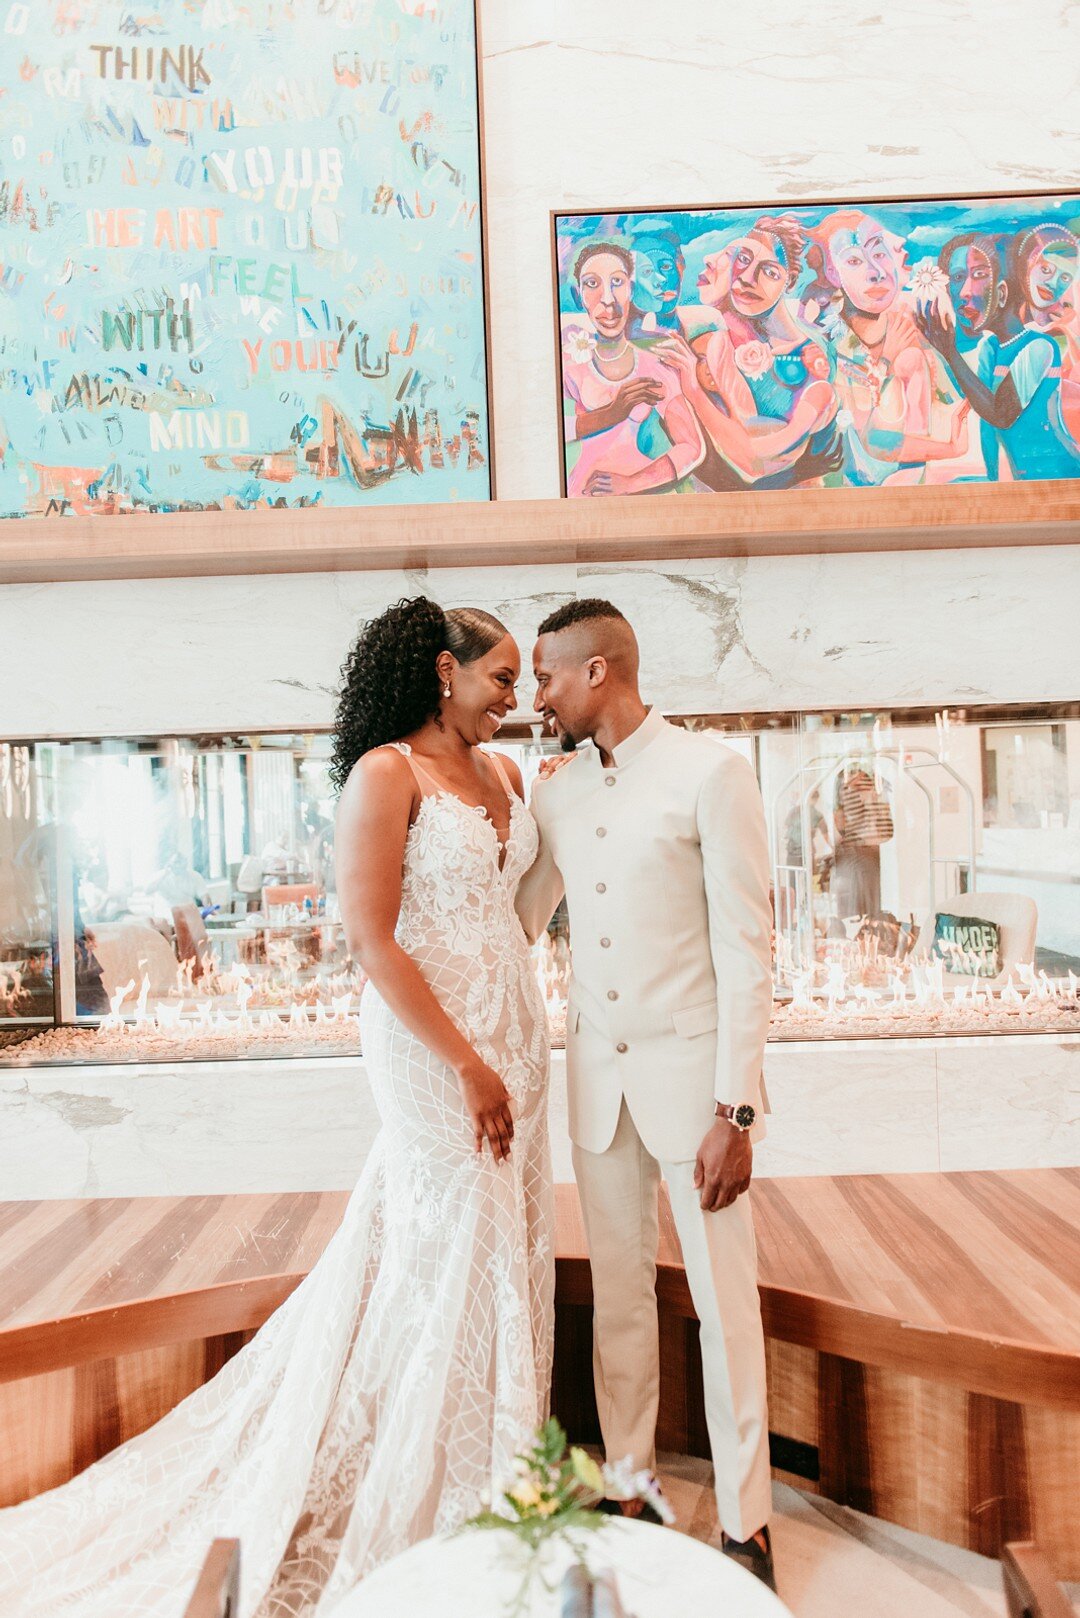 Sophisticated Southside Chicago wedding captured by Emily-Melissa Photography LLC featured on CHI thee WED. Find more Chicago wedding ideas on CHItheeWED.com!